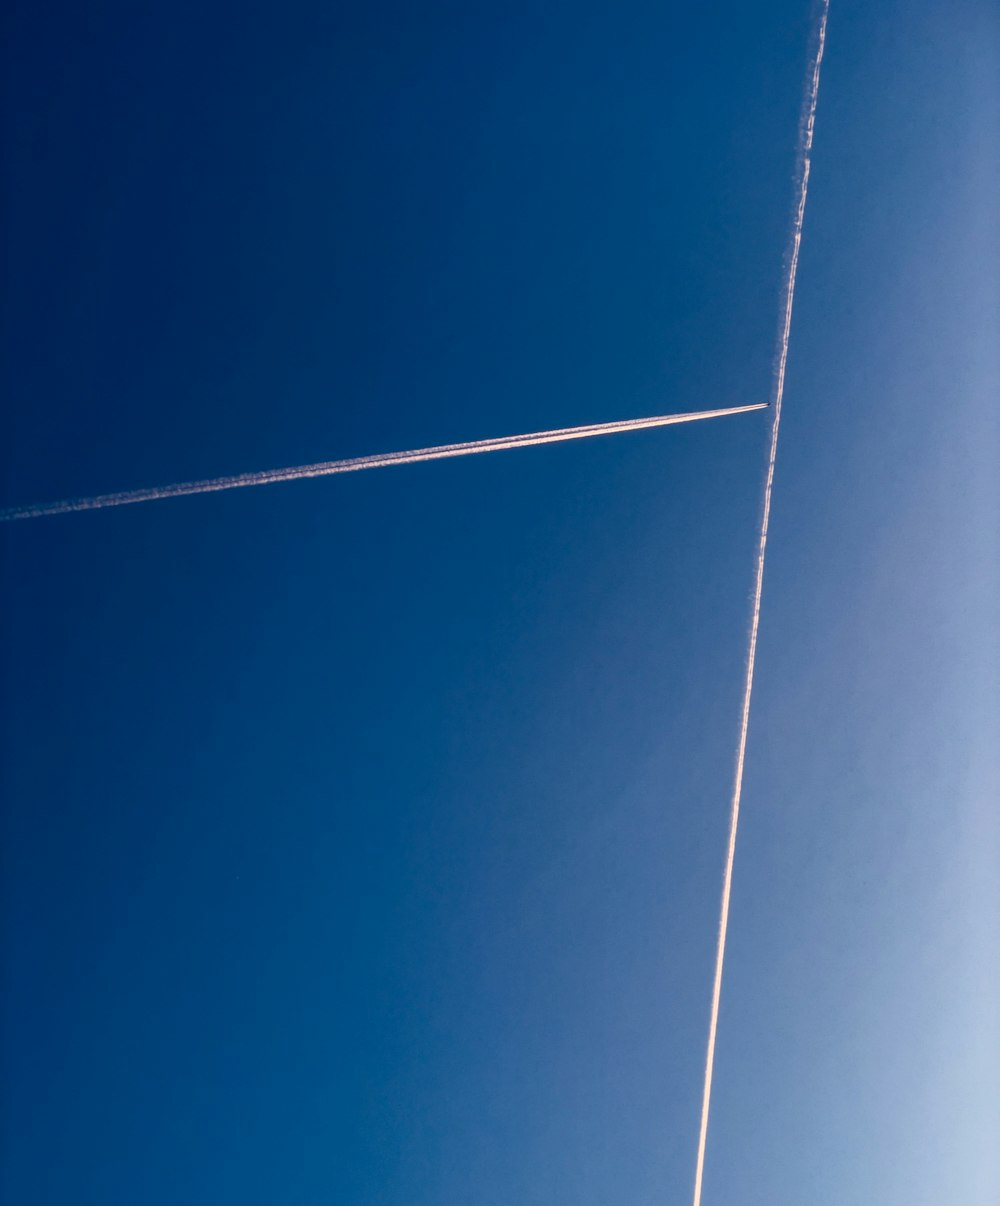 a jet flying through a blue sky with a contrail in the sky